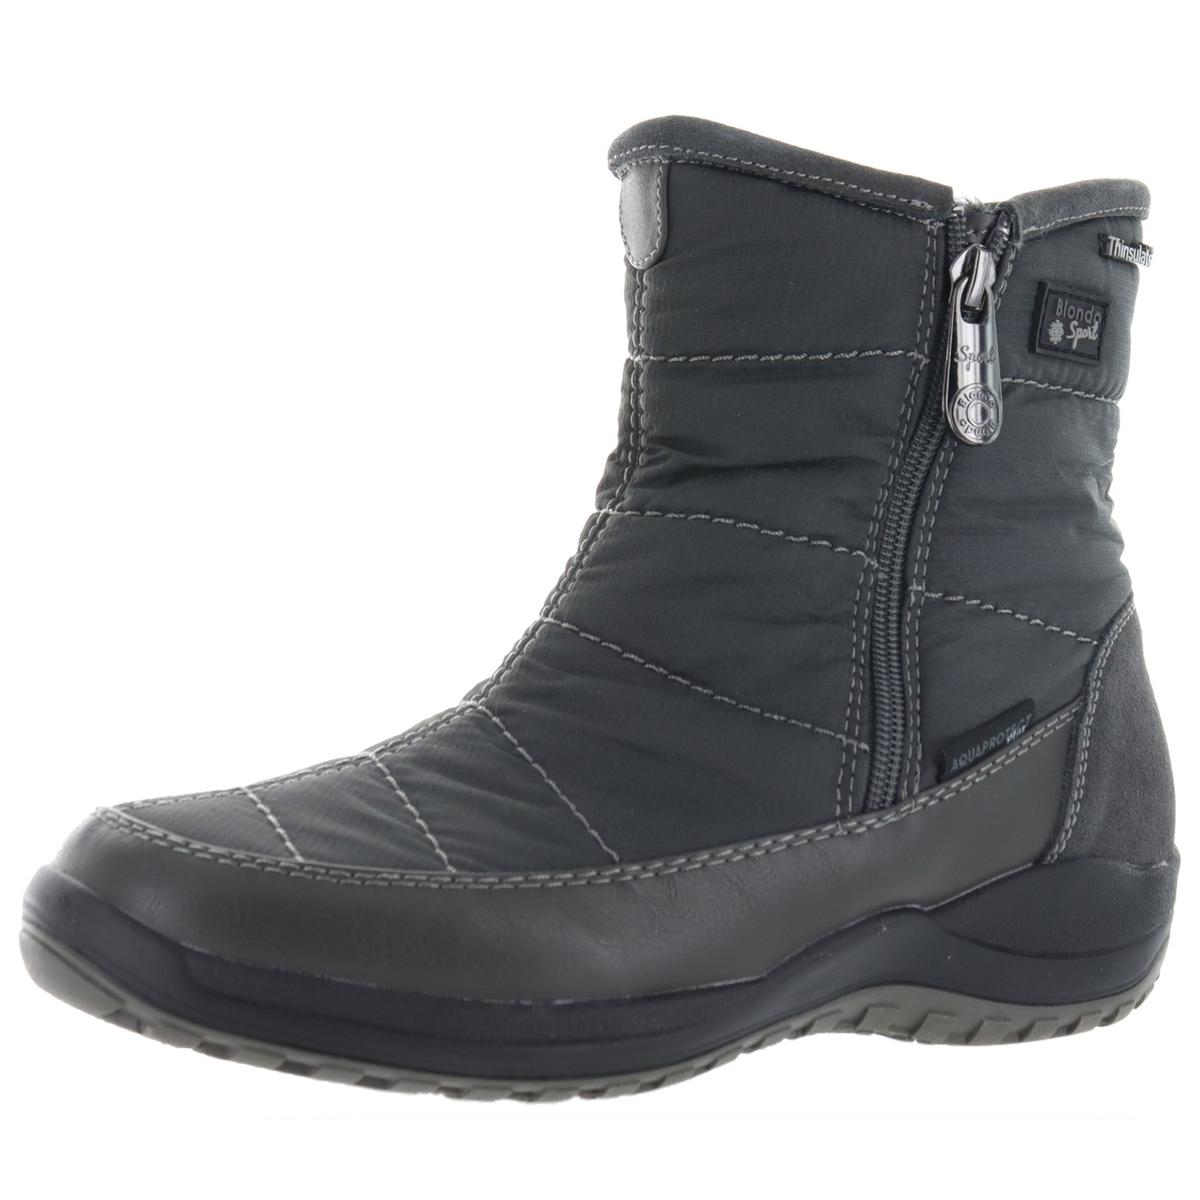 Blondo Ava Womens Cold Weather Waterproof Winter Boots